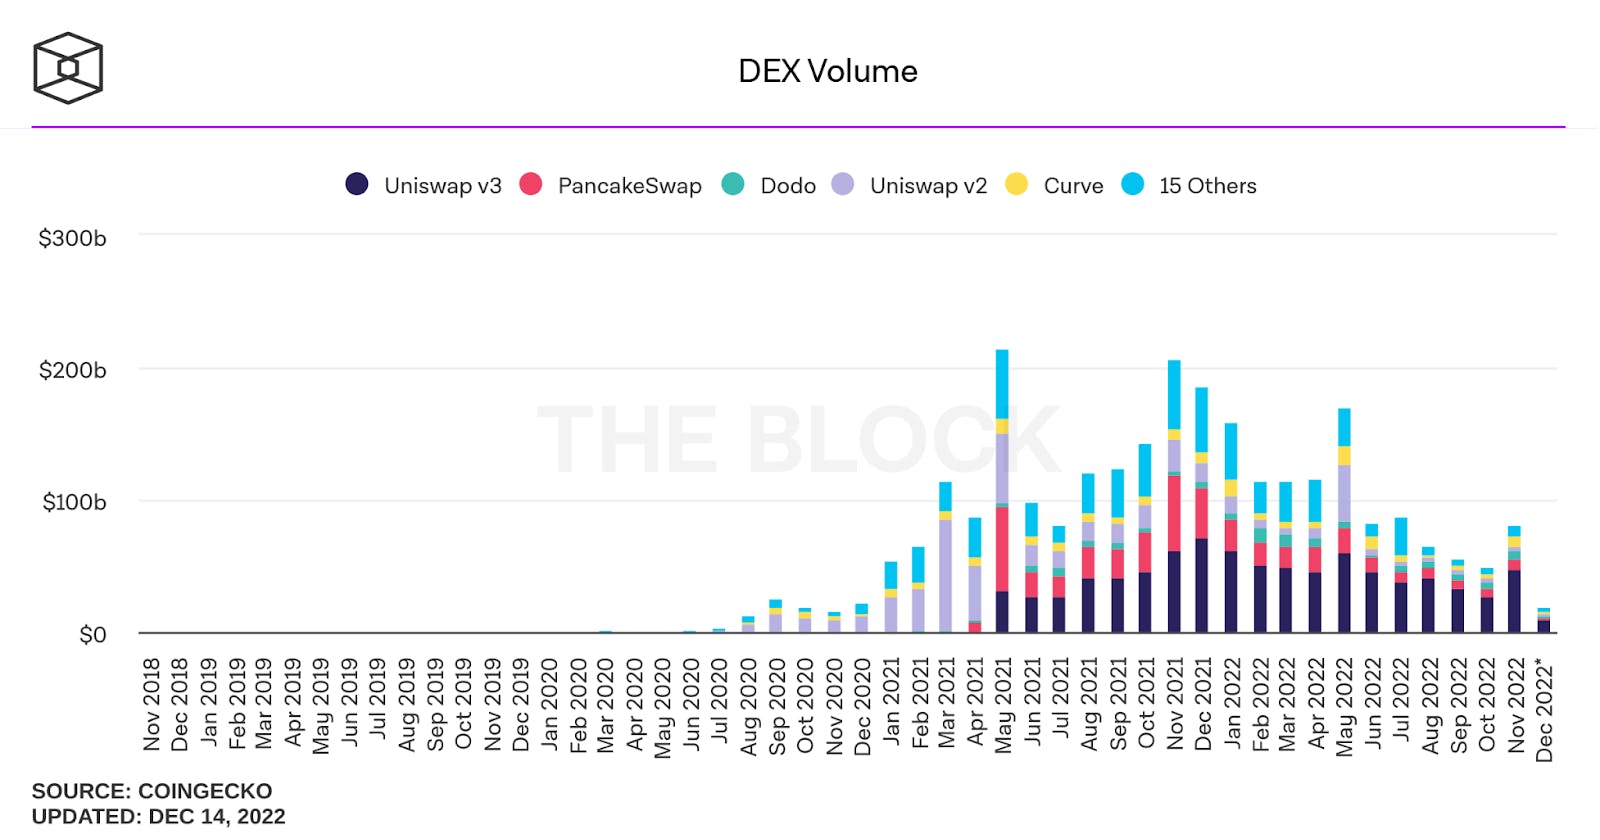 The volumes of leading decentralized exchanges (Uniswap, Pancakeswap, Curve and others) as aggregated by The Block data. 